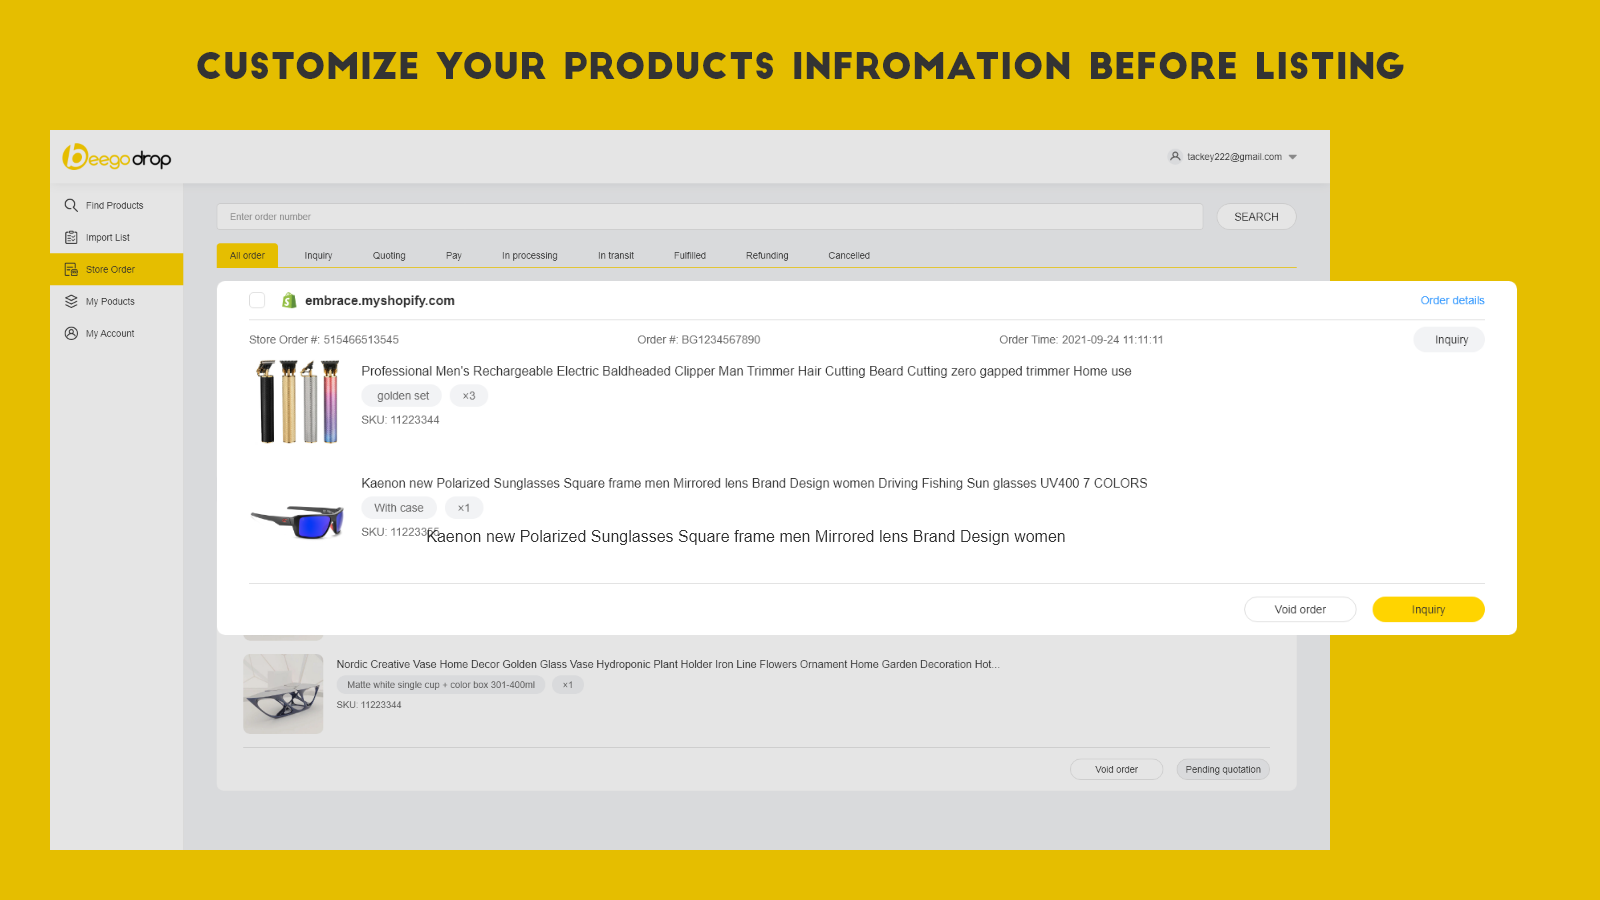 Customize your products information before listing